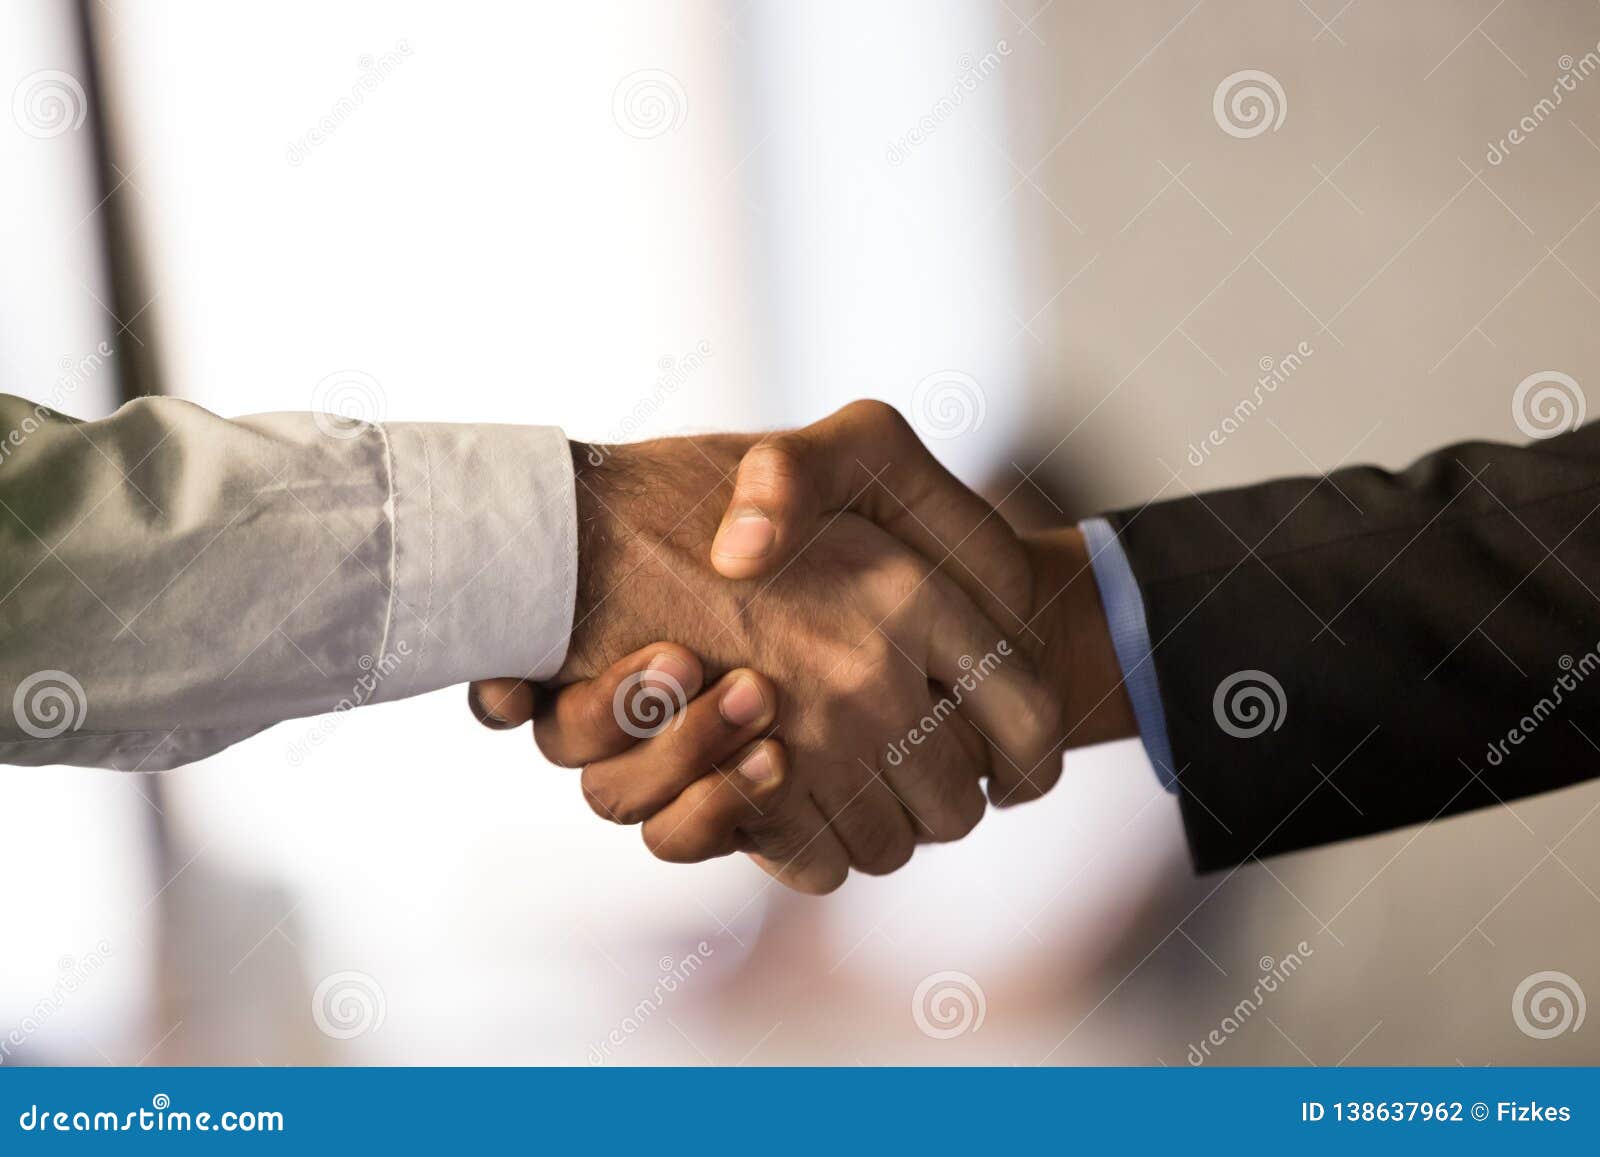 close up of male employees handshake closing deal